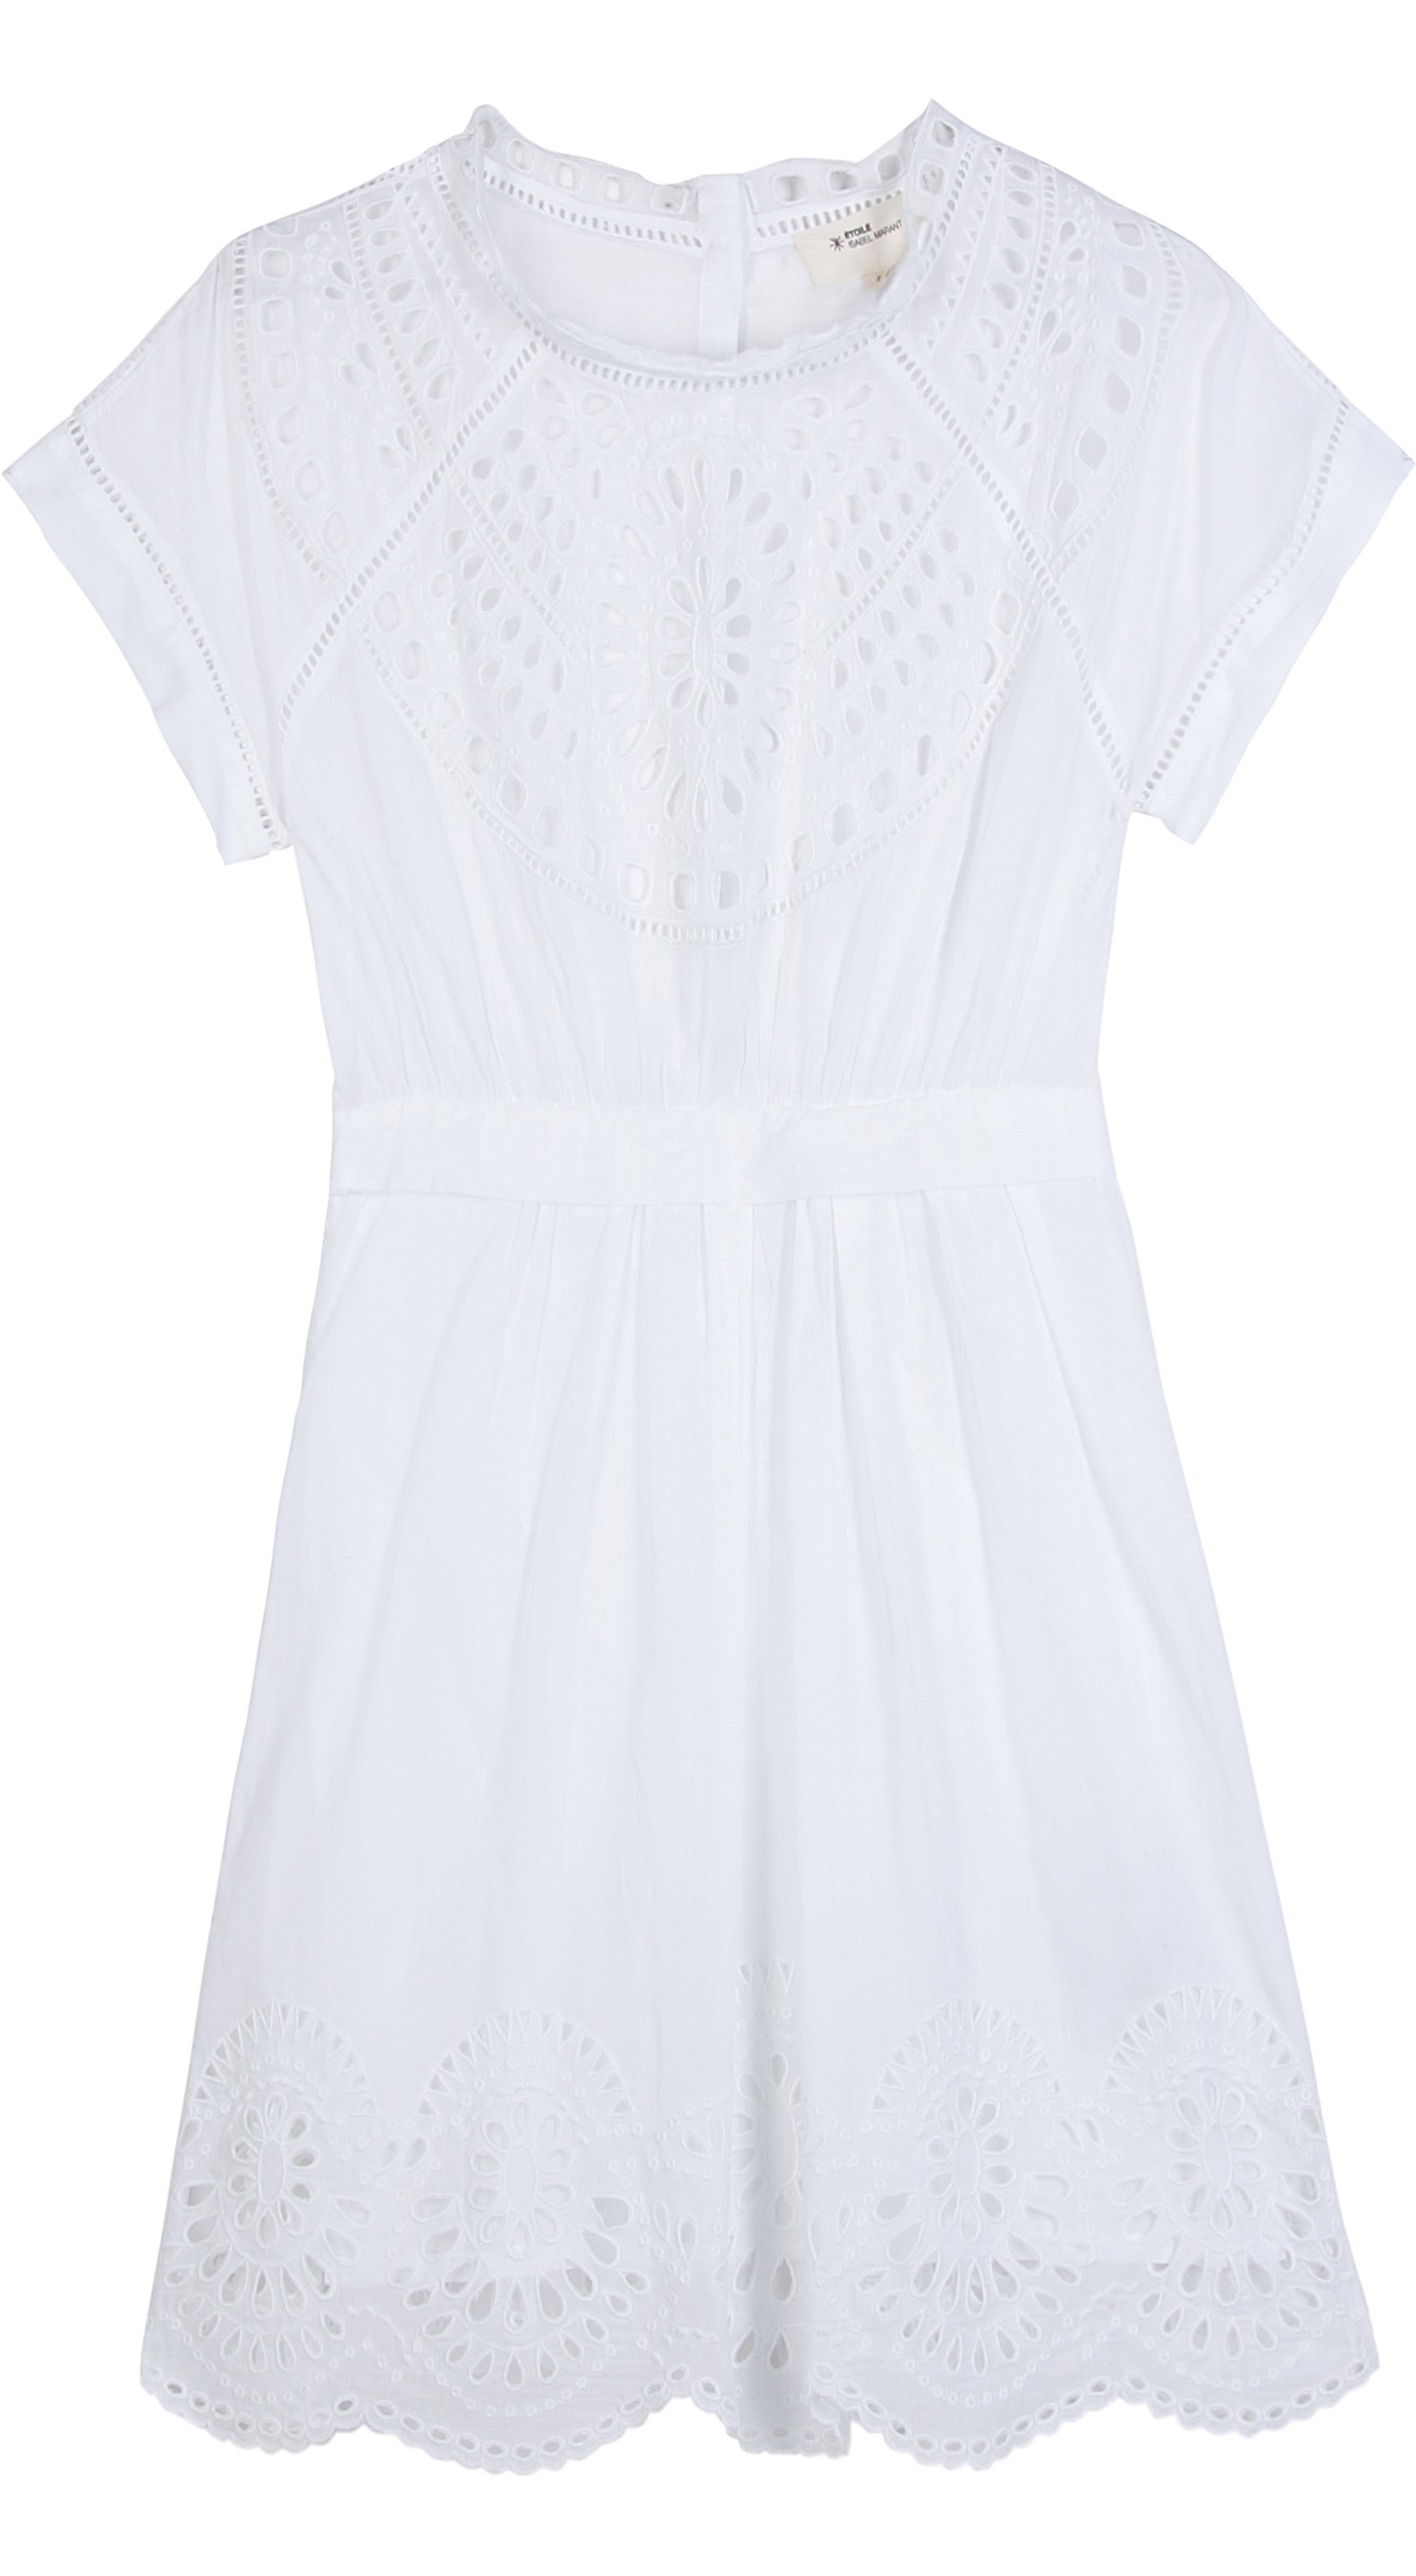 Etoile Isabel Marant Anita Embroidered Cutout Cotton Dress in White | Lyst